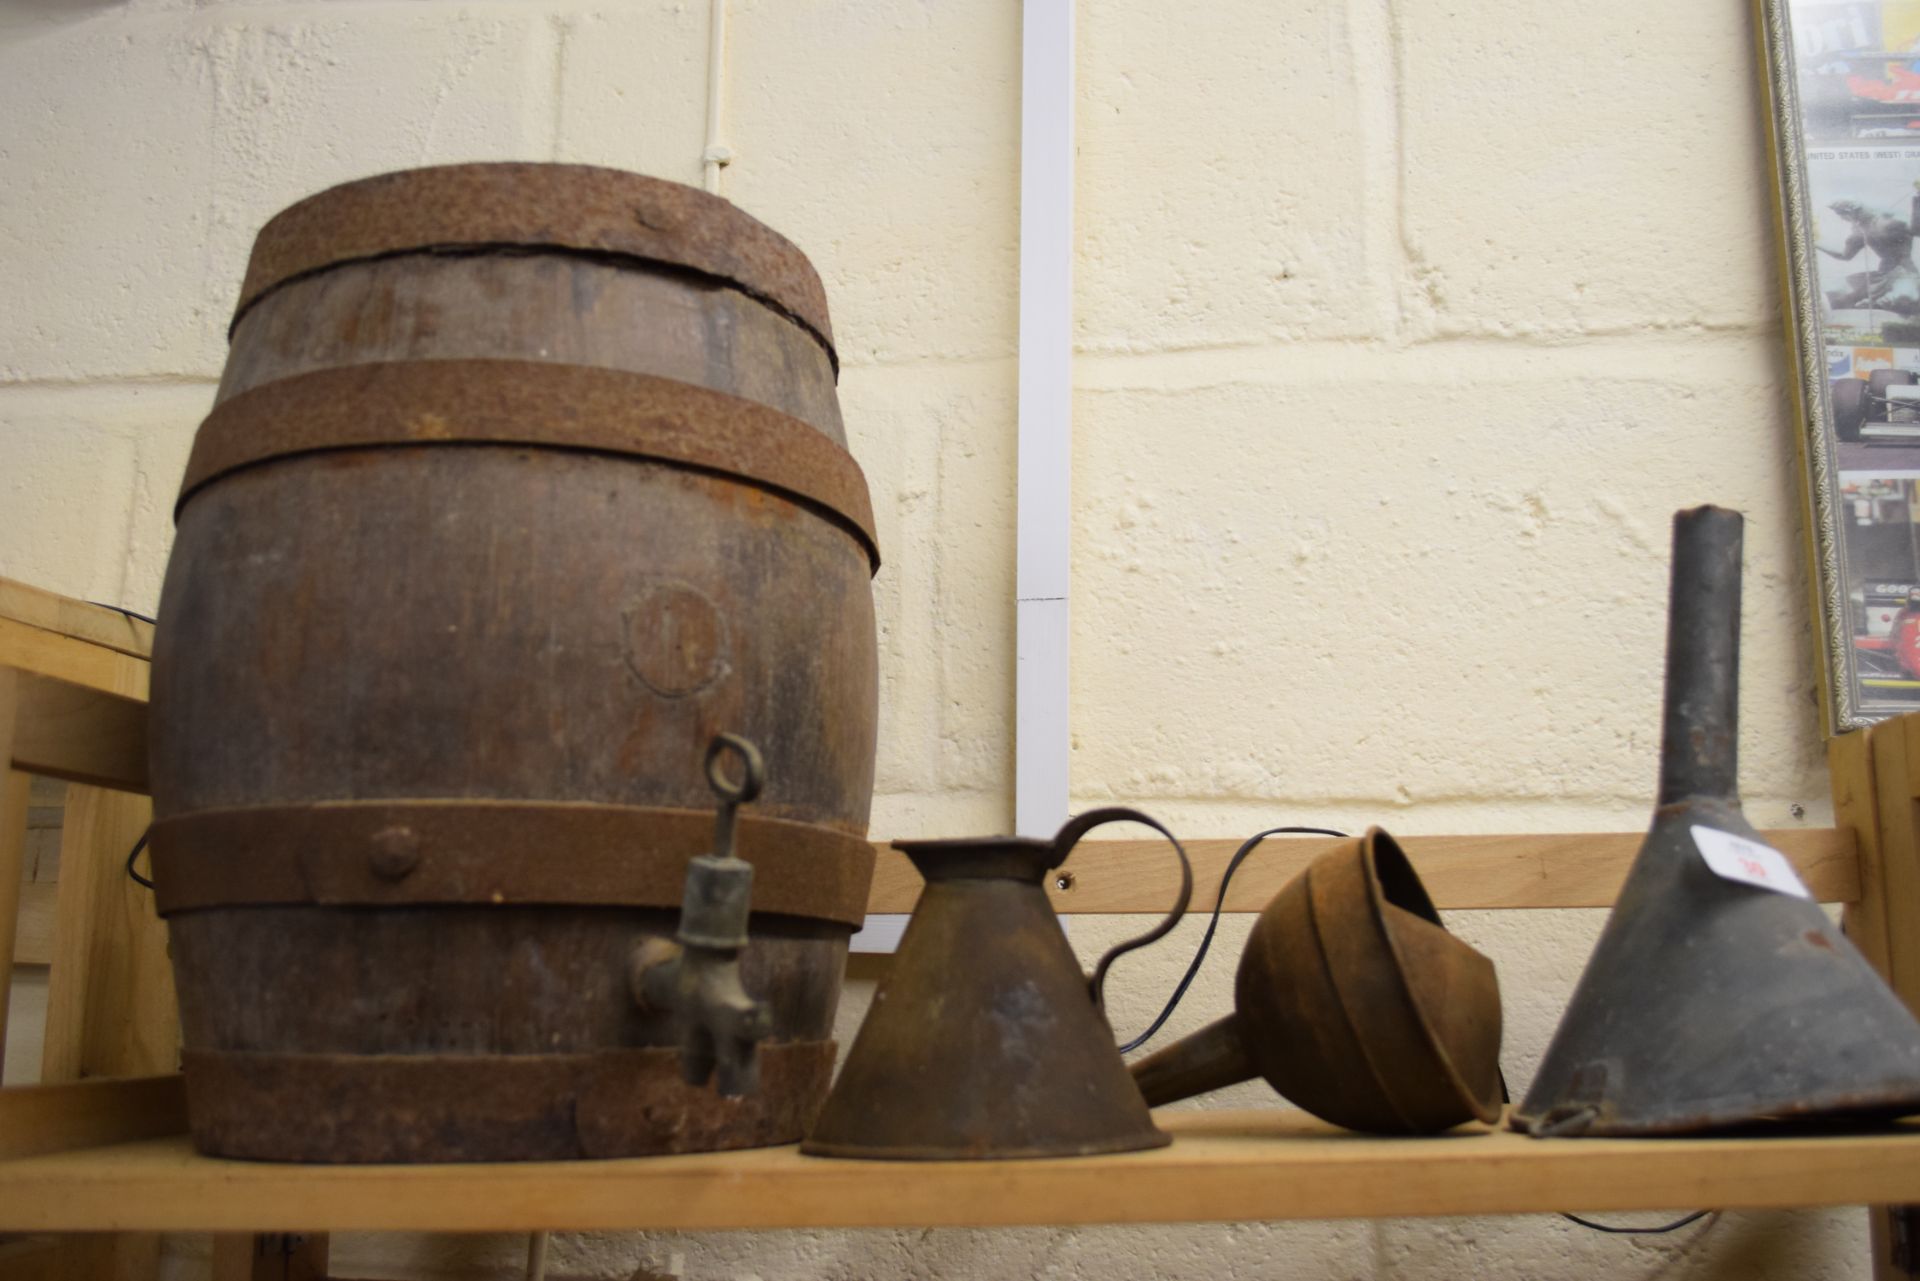 Small oak water/wine barrel with half pint tin jug and two funnels